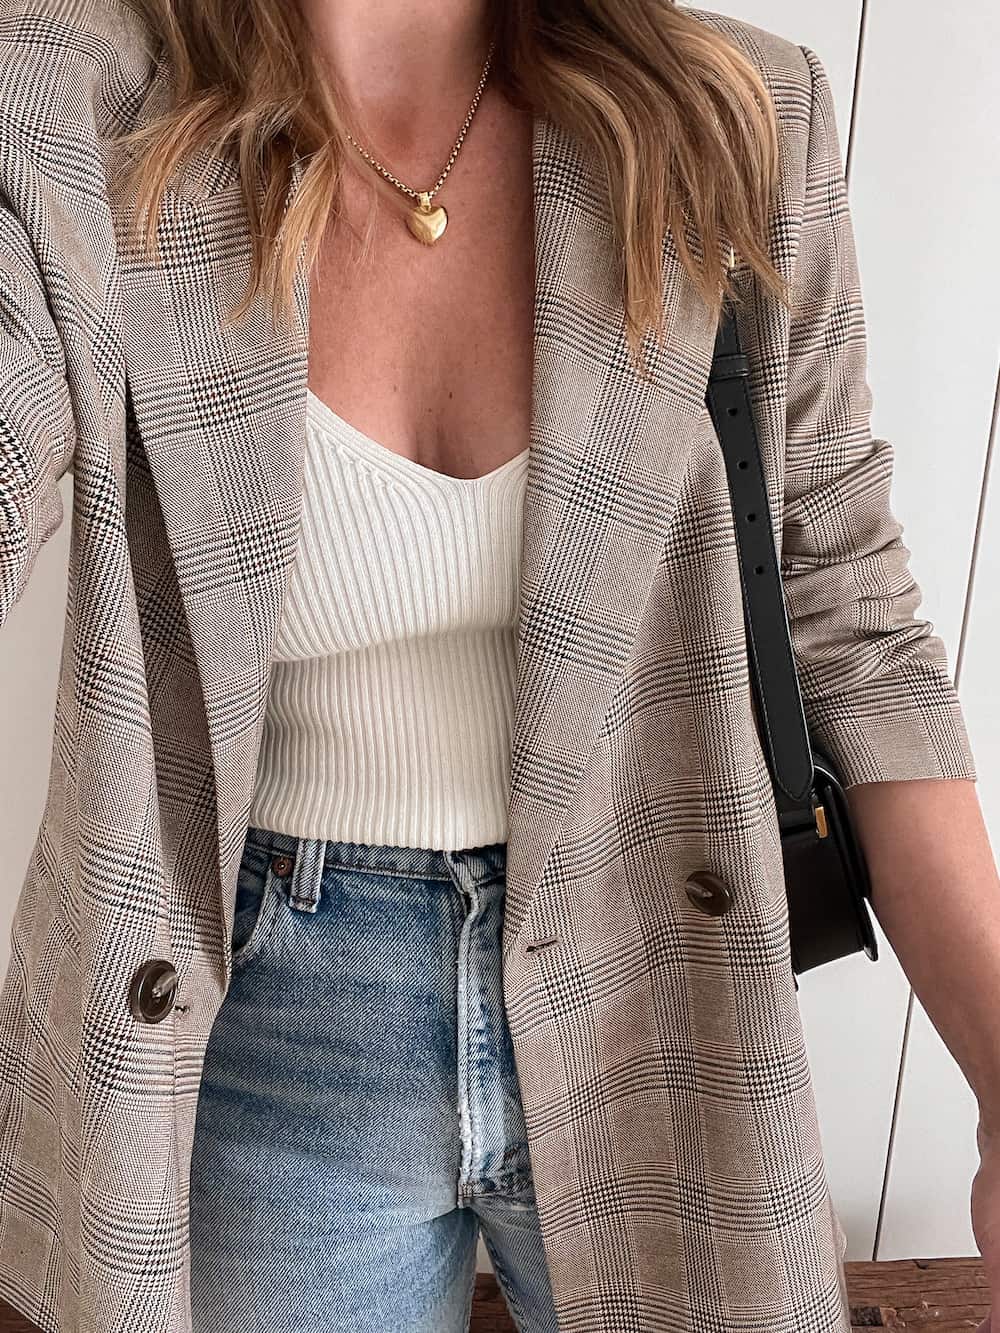 Up close photo of a woman wearing a white sweater tank top, a plaid blazer and light wash jeans.